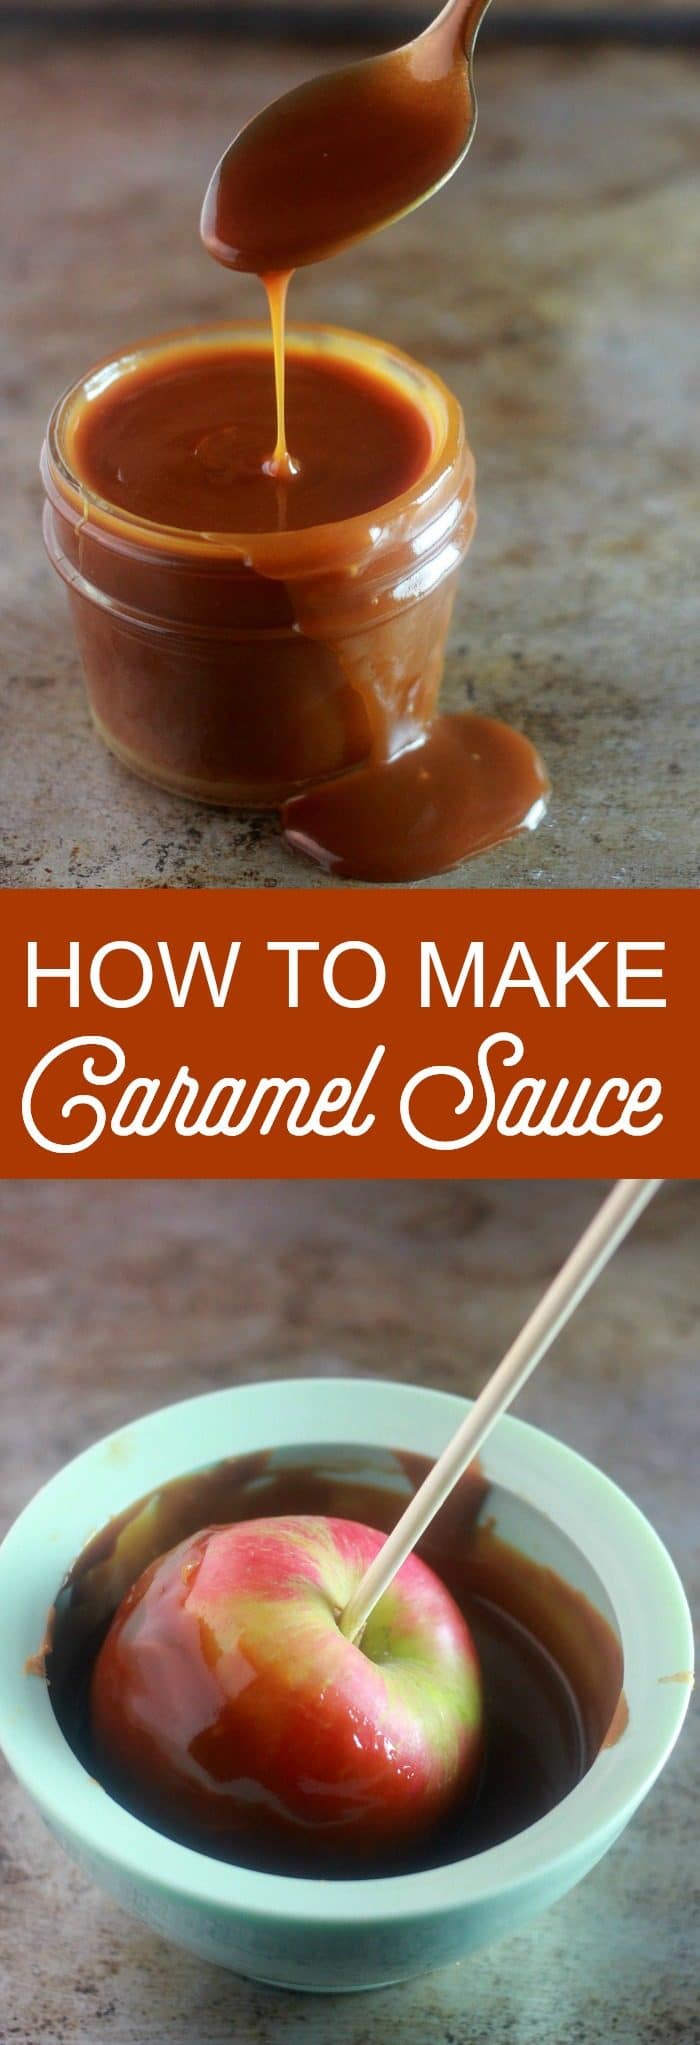 Learn the easy process of how to make caramel sauce with only four ingredients and less than 20 minutes! This sauce can be used as a dip, an ice cream topping, or a coating for caramel apples, and so much more! 